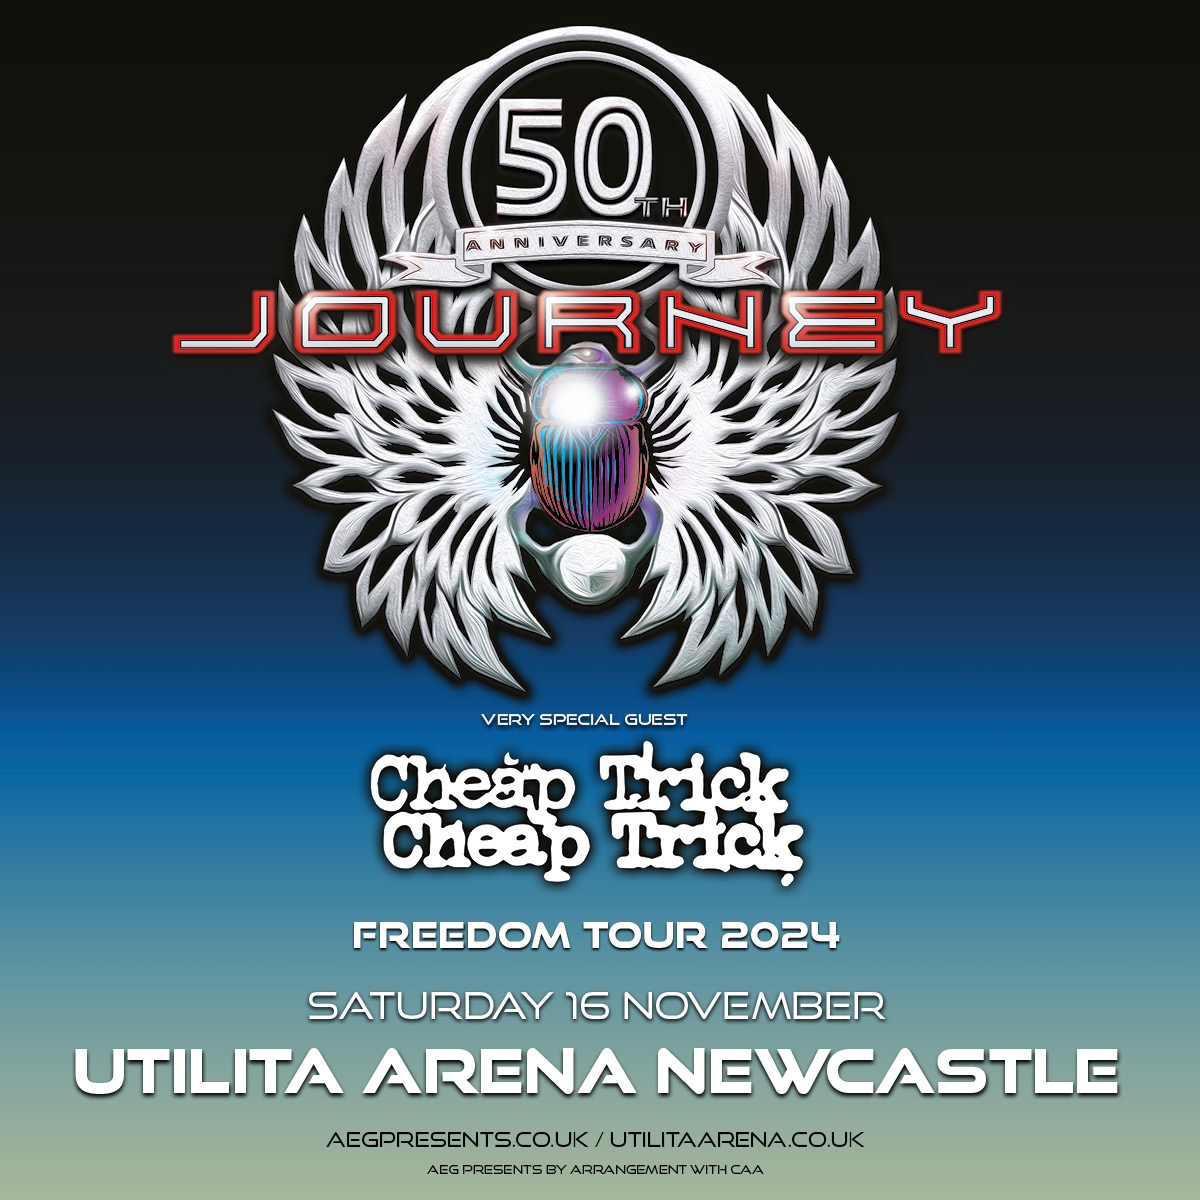 🆕 We celebrate 50 years of rock legends @JourneyOfficial this November as they bring the #FreedomTour2024 to Utilita @ArenaNewcastle alongside special guests @cheaptrick!

🎟️ Tickets are available right now!
ℹ️ bit.ly/Journey-NewcX